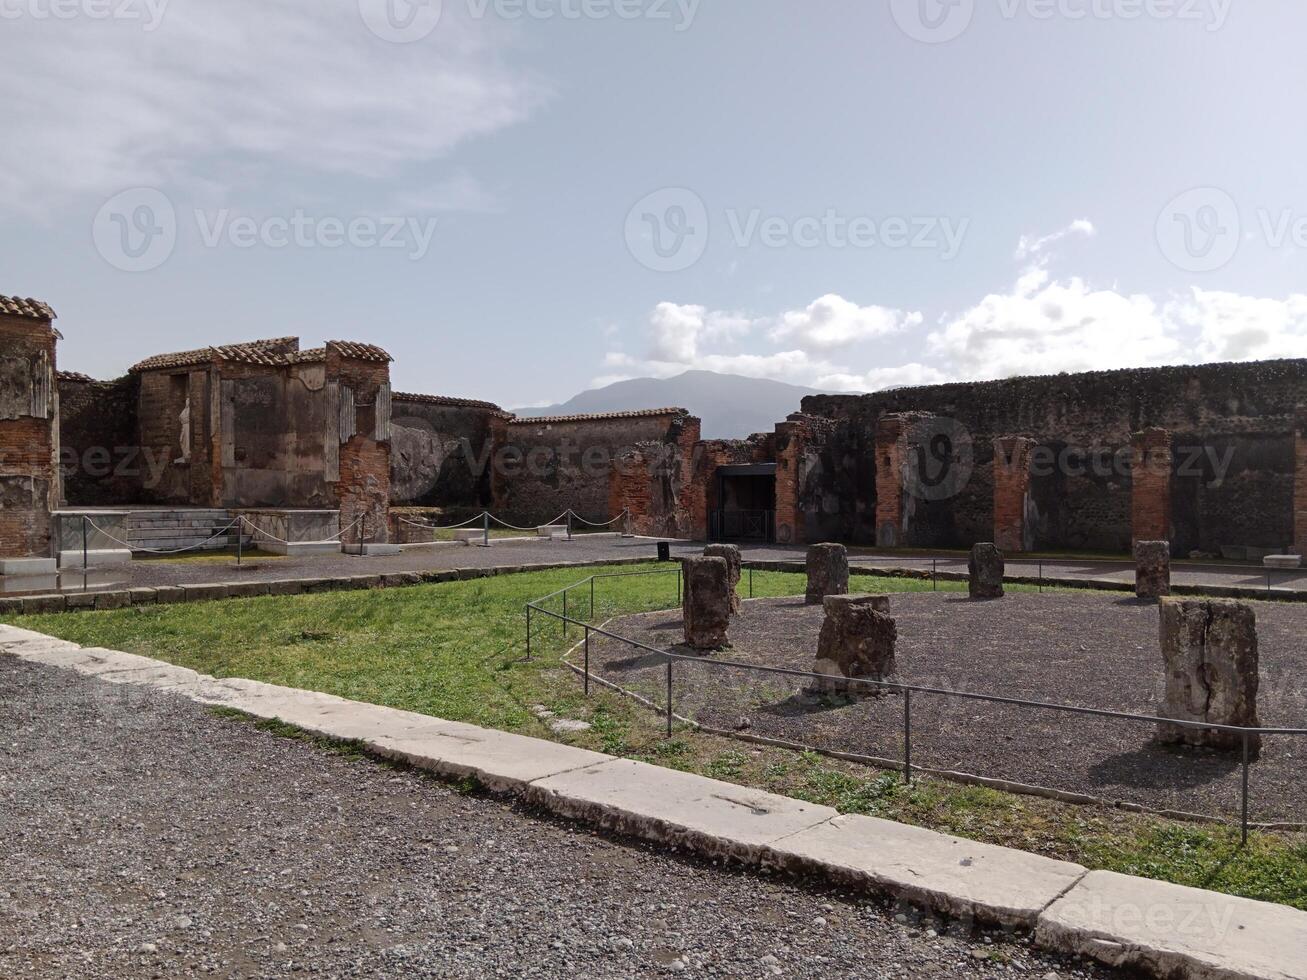 Pompeii, the ancient Roman city buried by the eruption of Mount Vesuvius, stands as a UNESCO World Heritage Site, offering a unique glimpse into daily life during the Roman Empire. photo